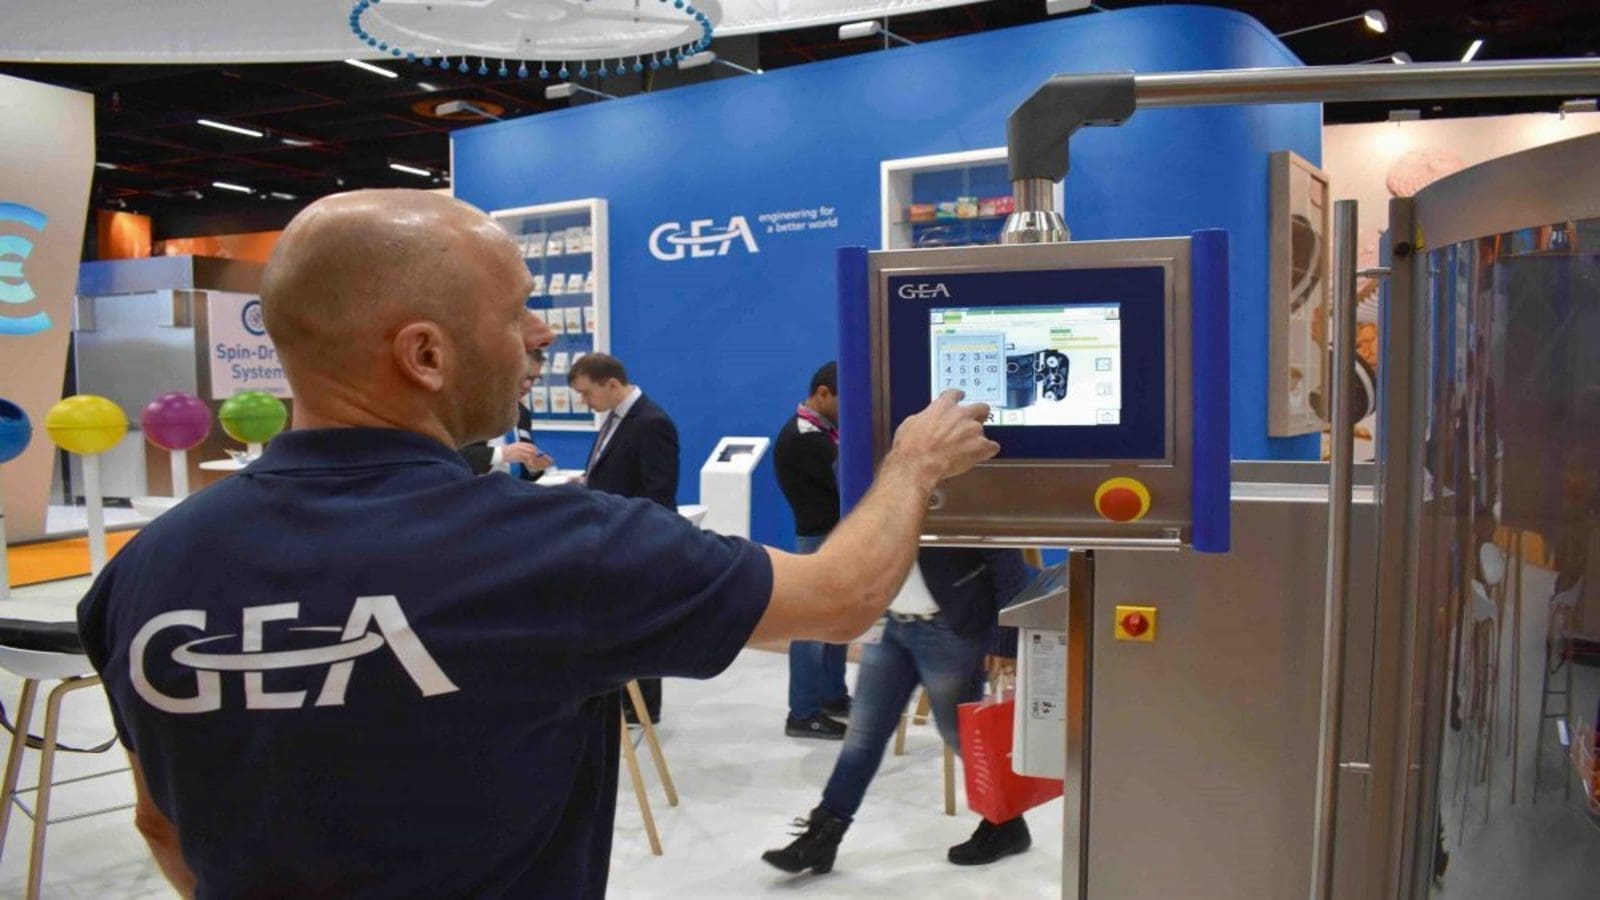 GEA launches water-saving dealcoholization system for beer